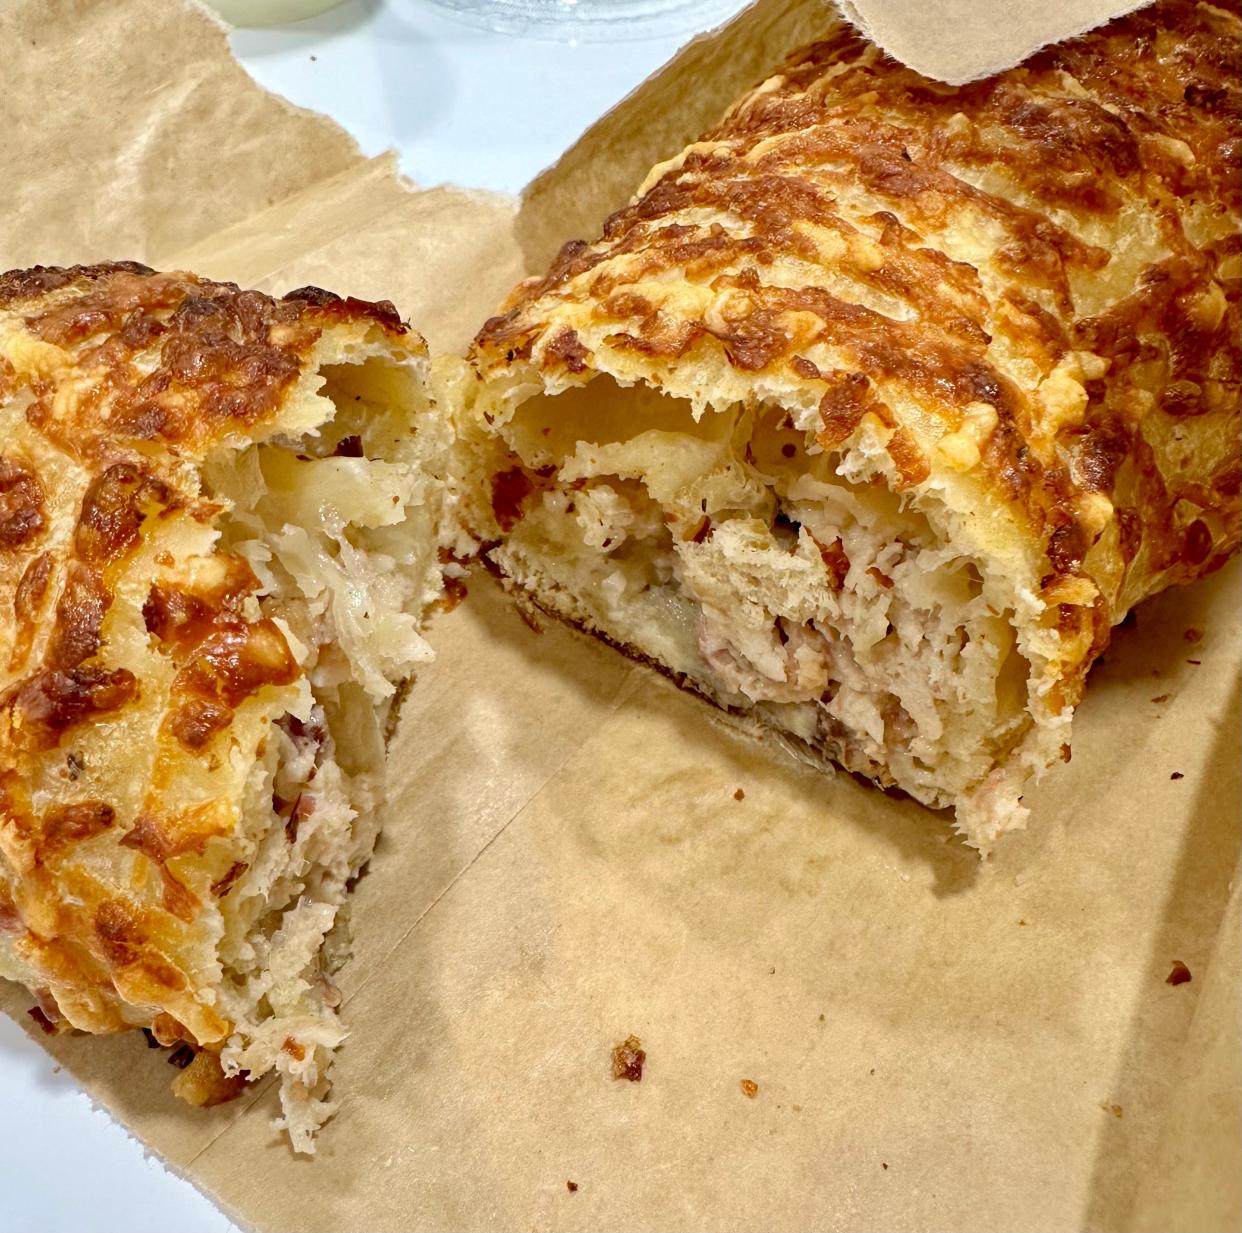 The Chicken Bake is more like a toasted wrap with chunks of chicken, pieces bacon and a Caesar dressing coated with shredded cheese.